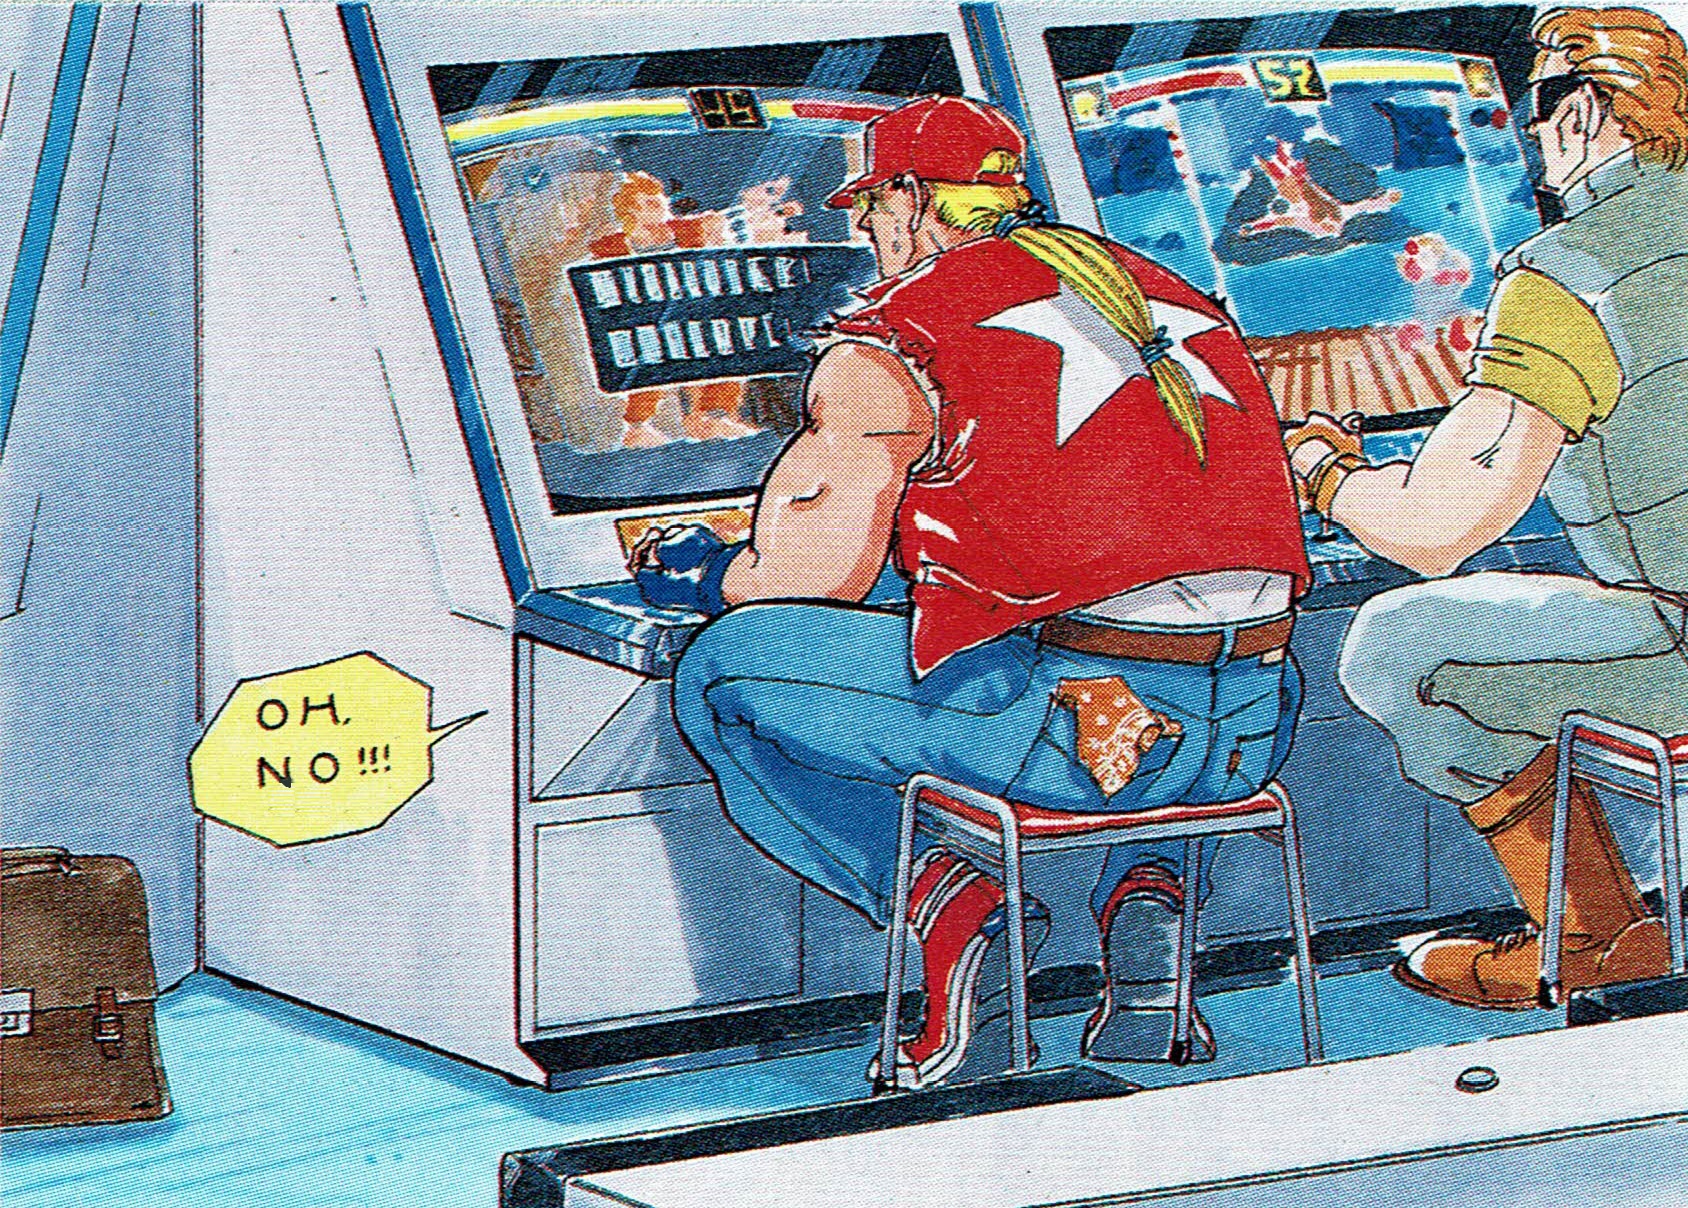 VideoGameArt&Tidbits on X: Fatal Fury - promotional character artwork. SNK  arcade (1991).  / X